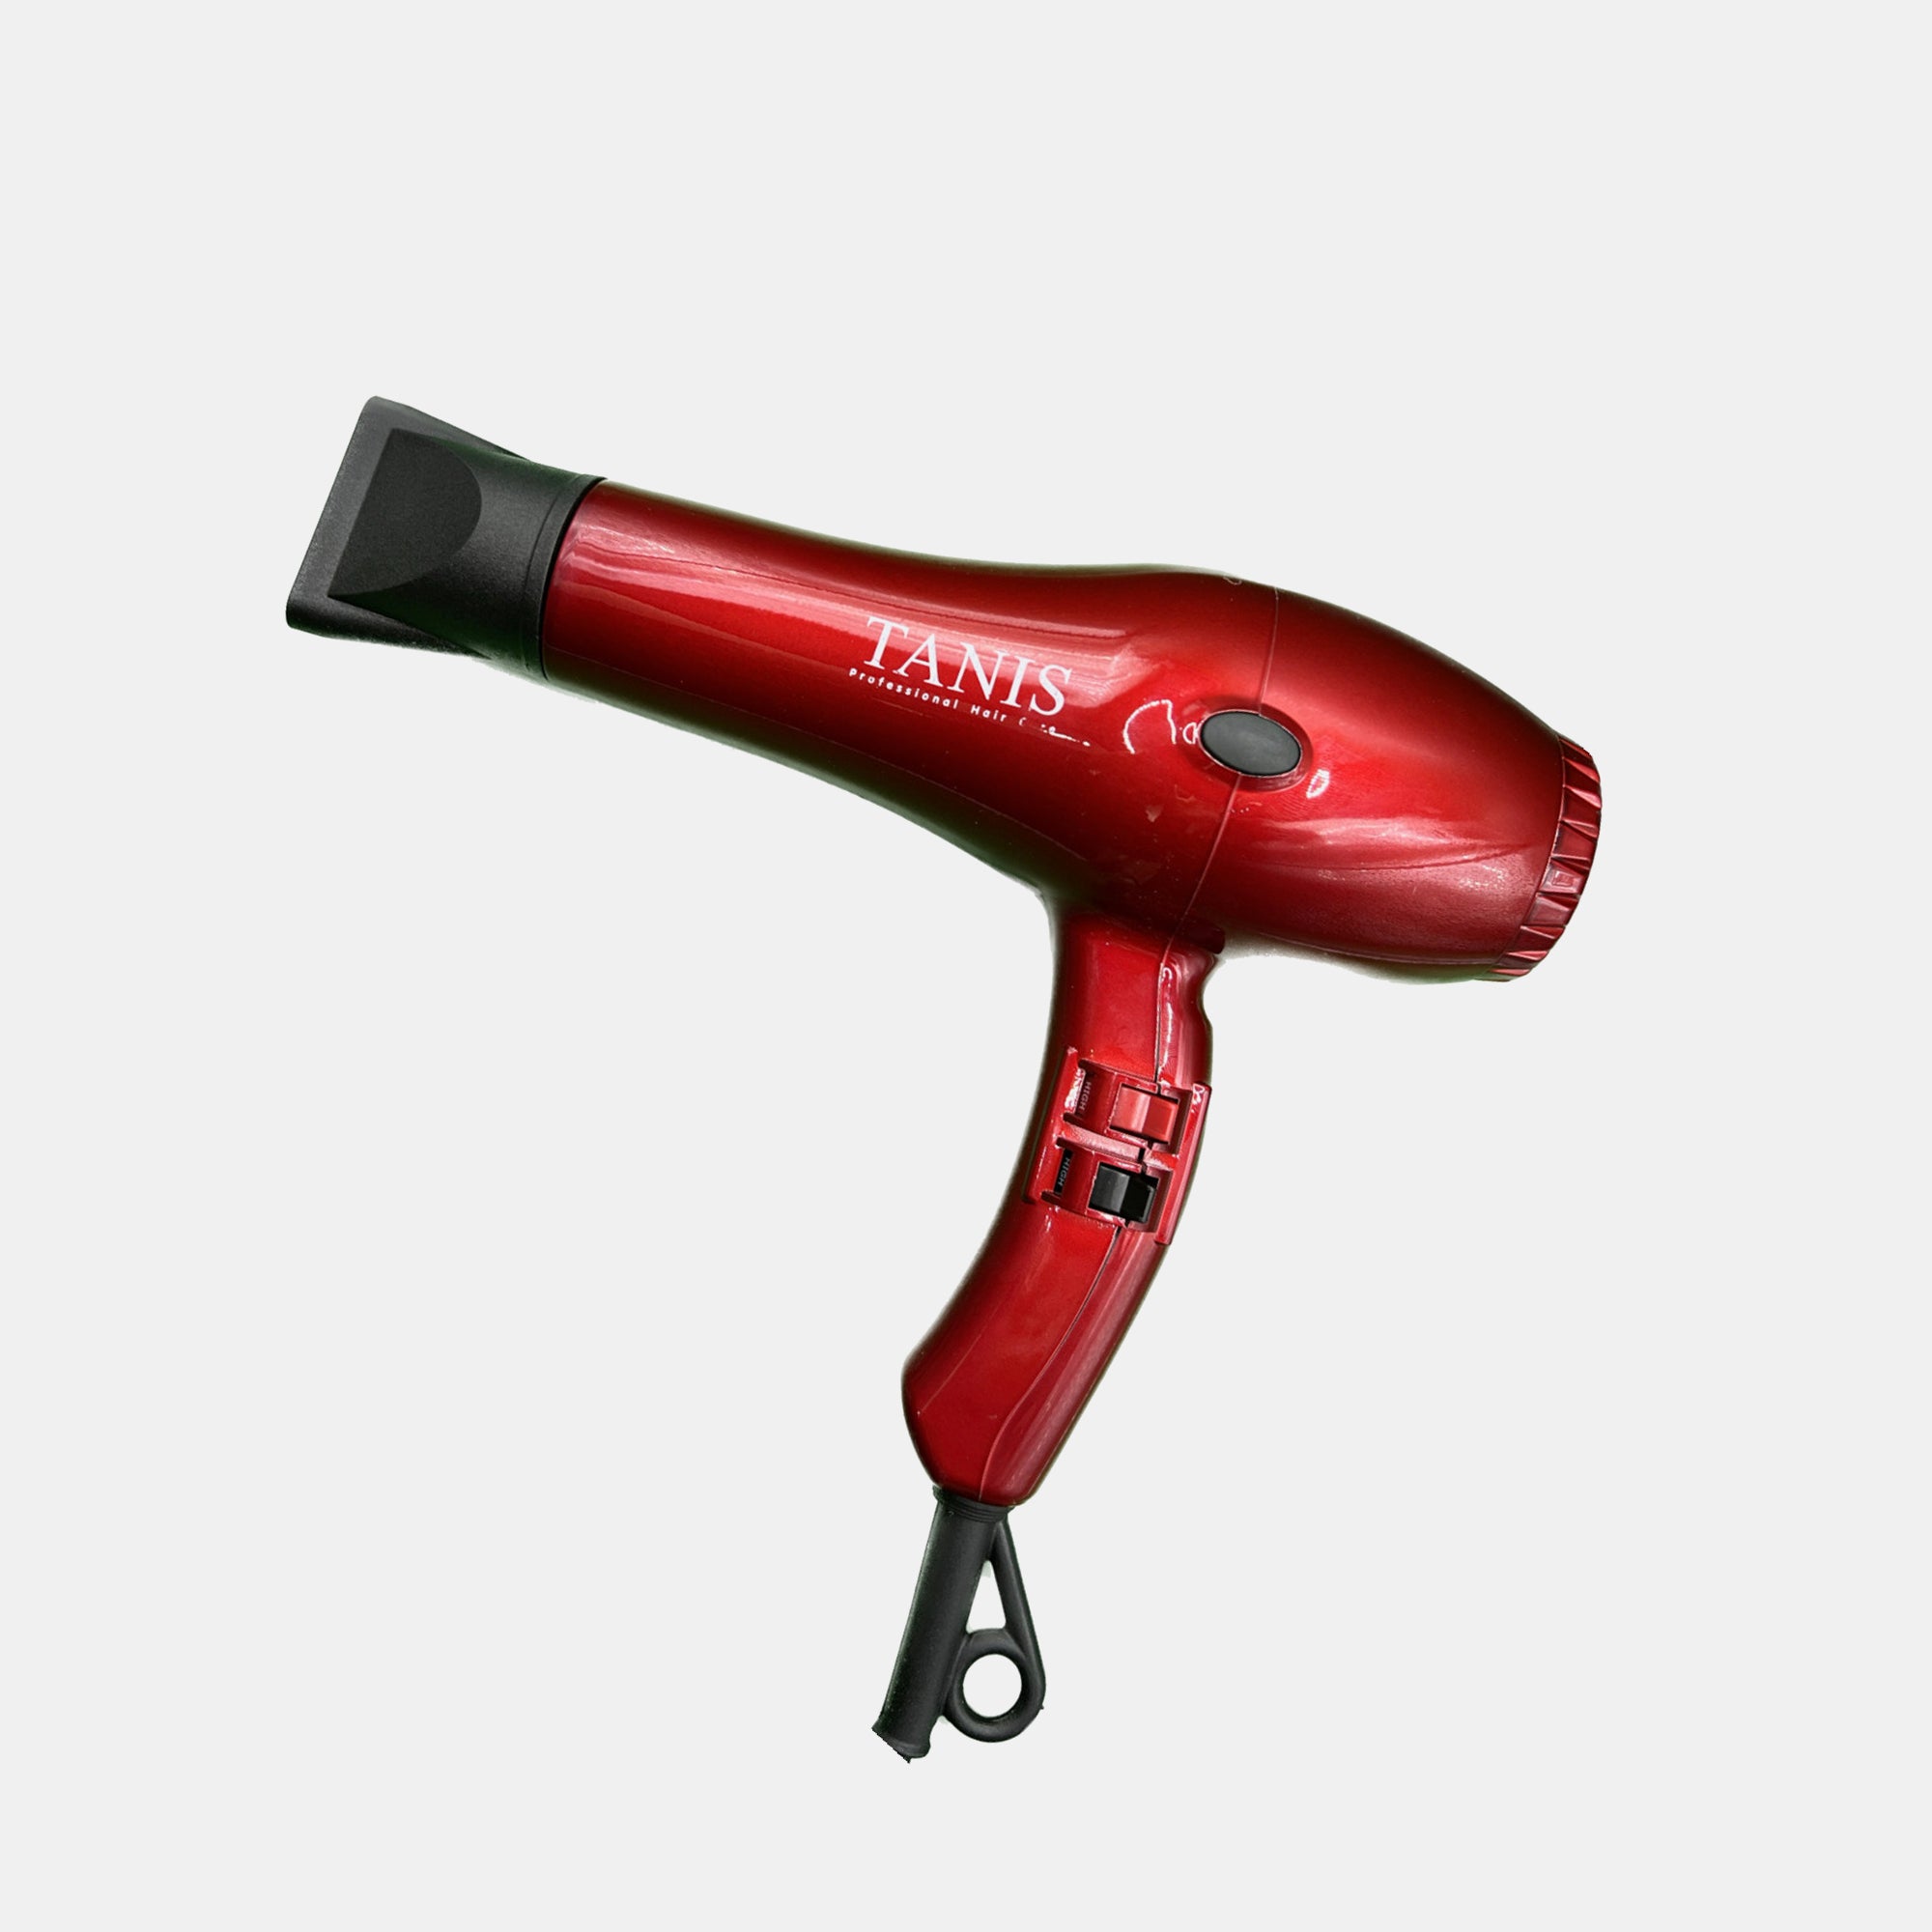 Hair dryer, red, NEW!